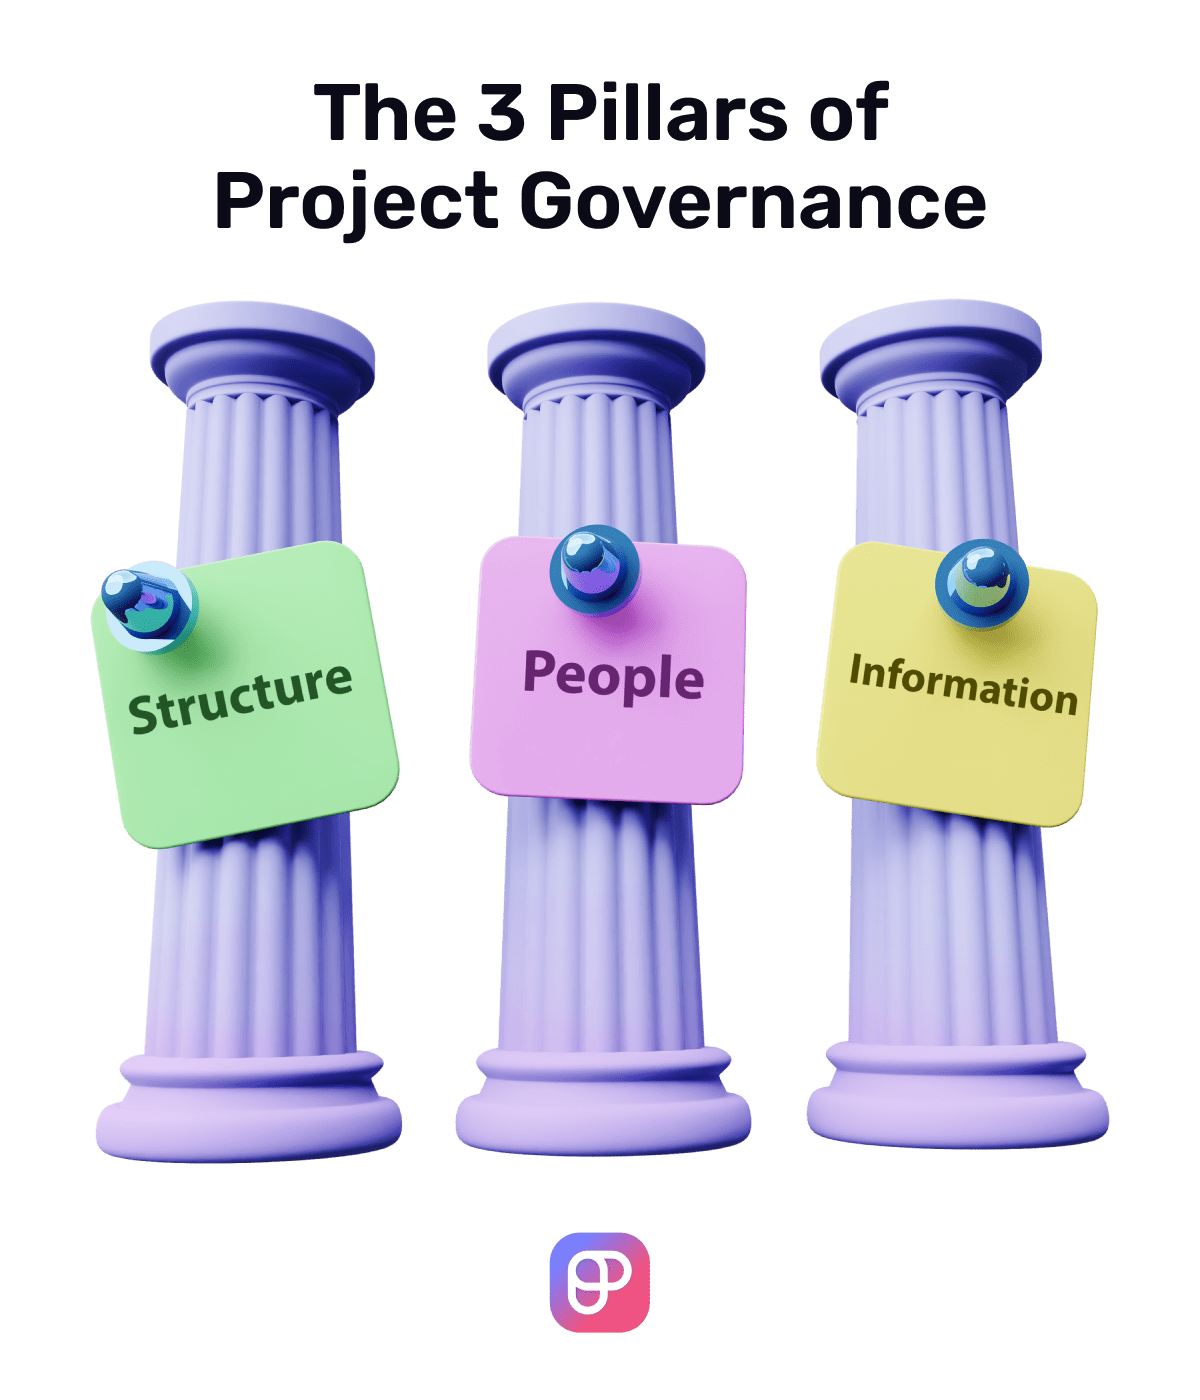 The 3 pillars of project governance